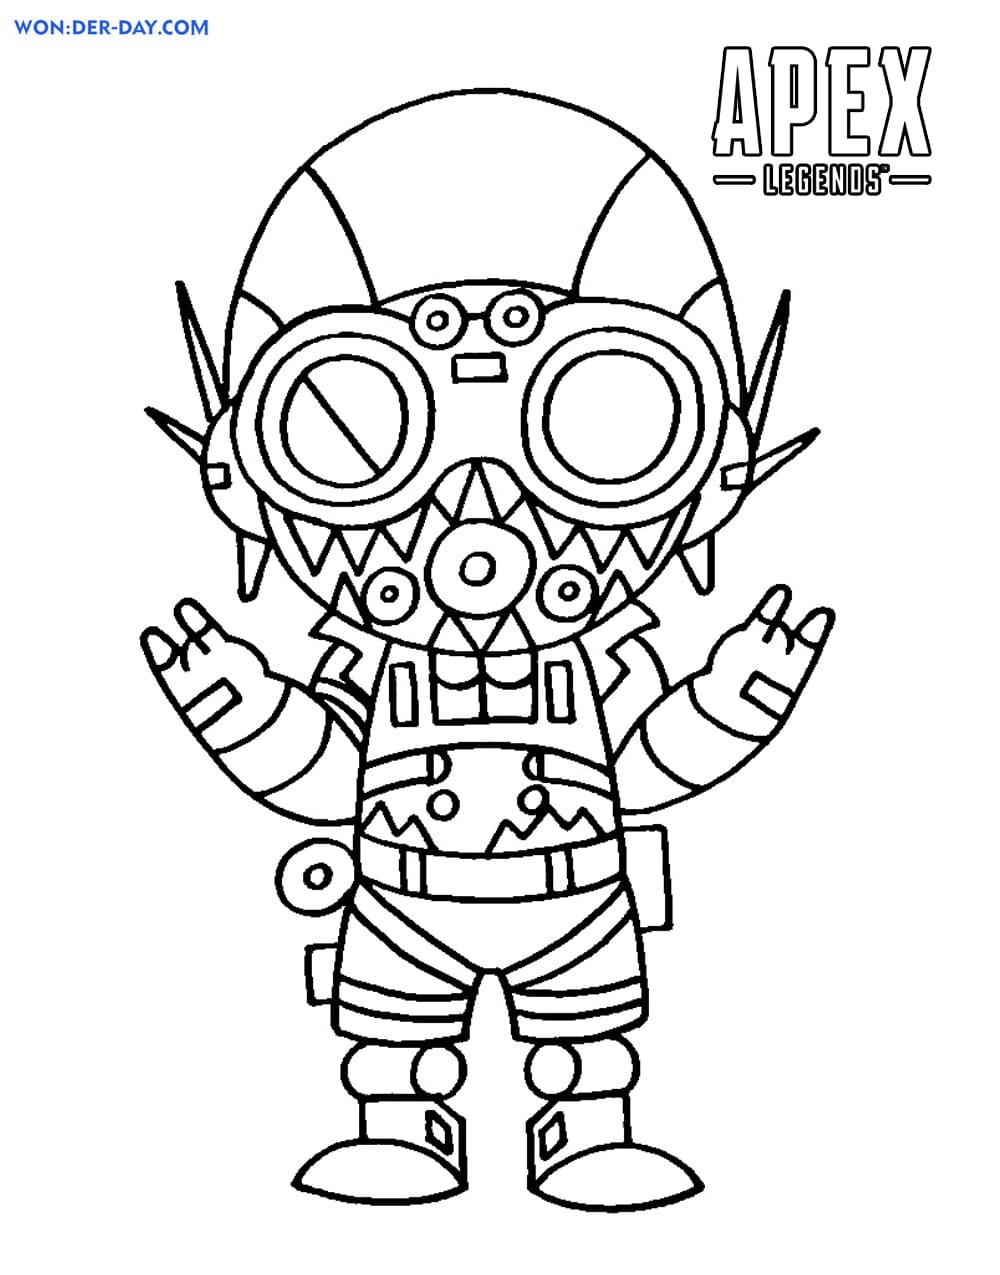 Bloodhound Apex Legends Coloring Page Caustic Apex Legends Coloring Printable Coloring Book